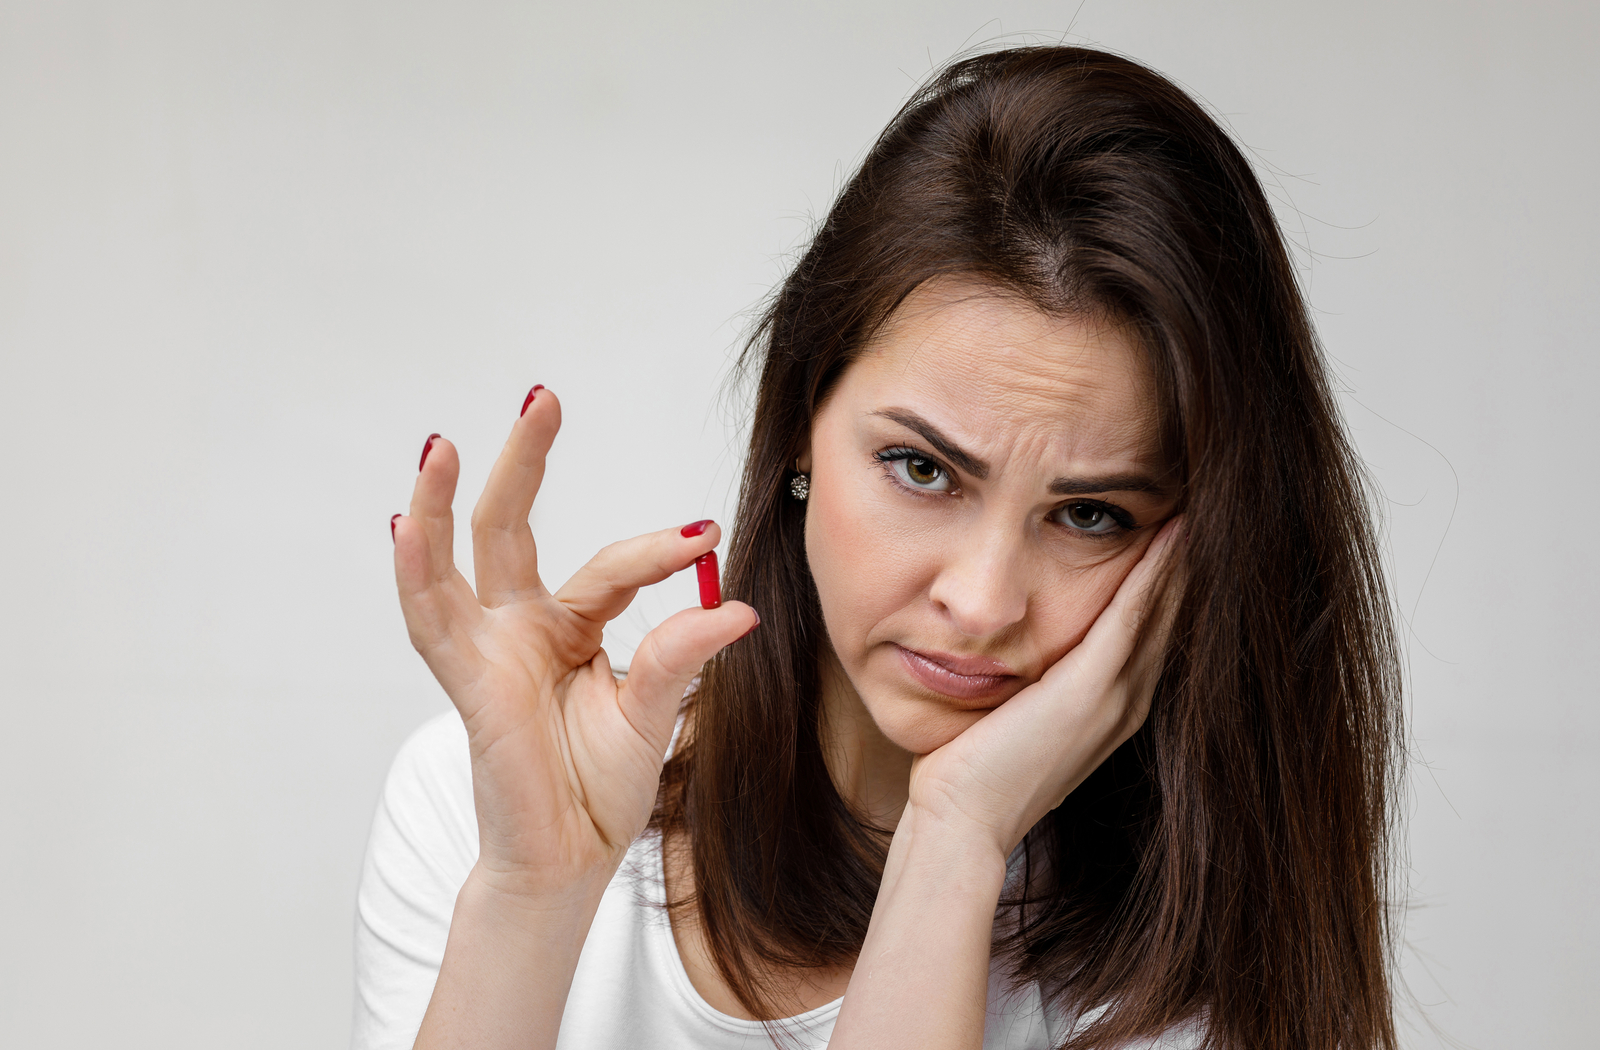 Dealing with Toothache Causes, Relief, and Prevention